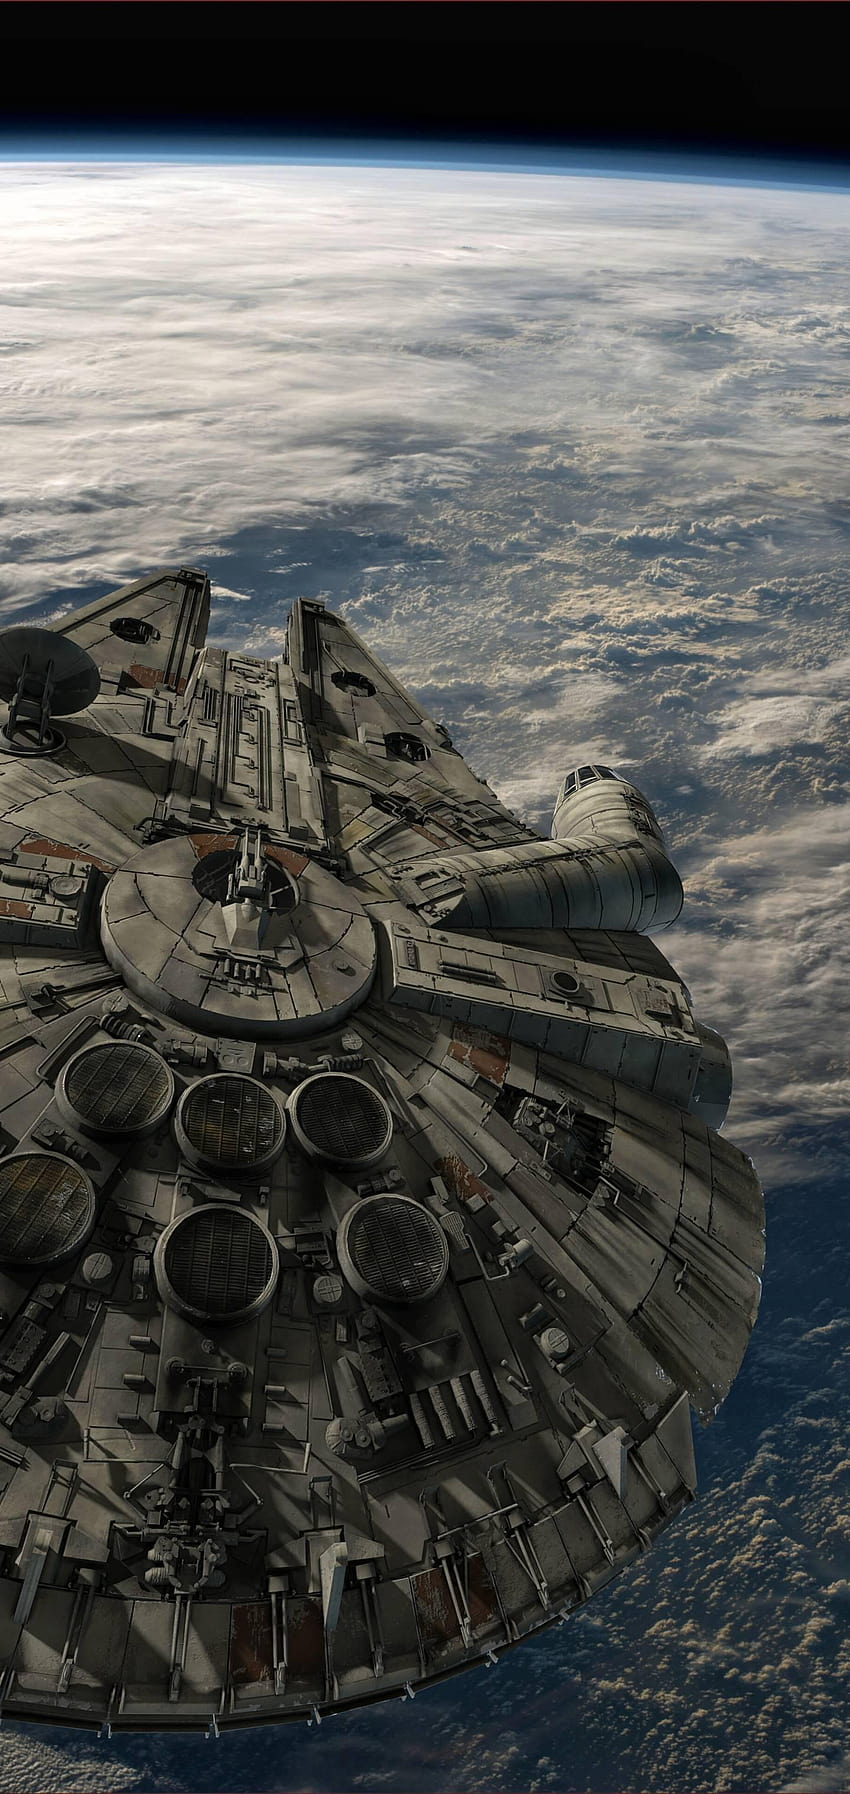 My home screen the Millennium Falcon : iphone, millennium falcon iphone HD phone wallpaper